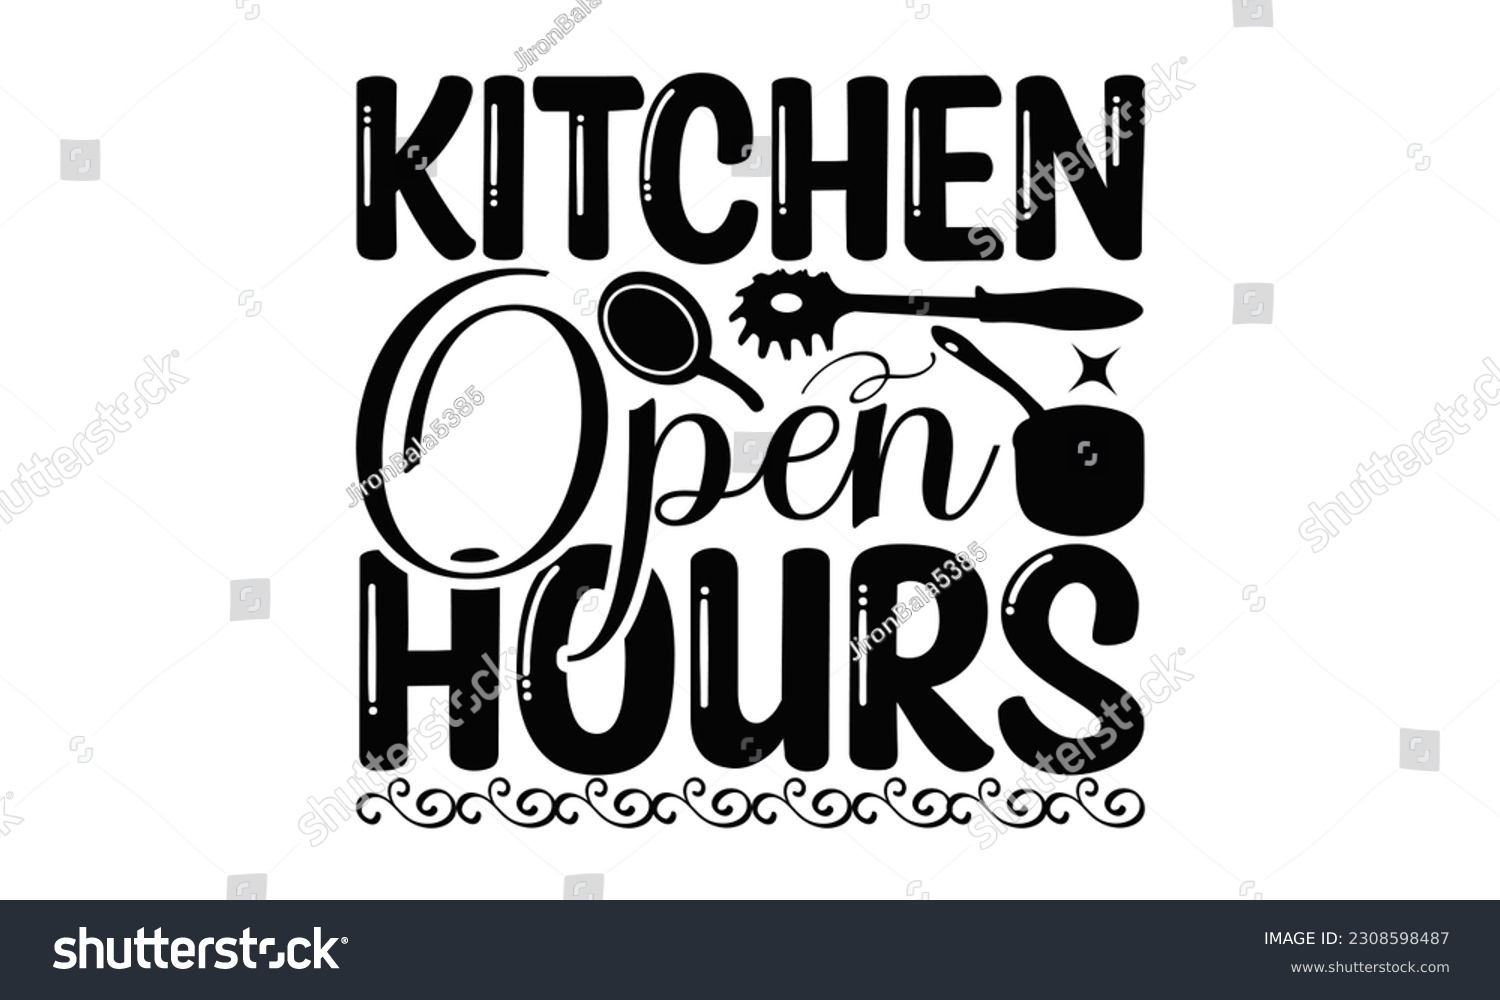 SVG of Kitchen Open  Hours - Cooking SVG Design, Isolated on white background, Illustration for prints on t-shirts, bags, posters, cards and Mug. svg